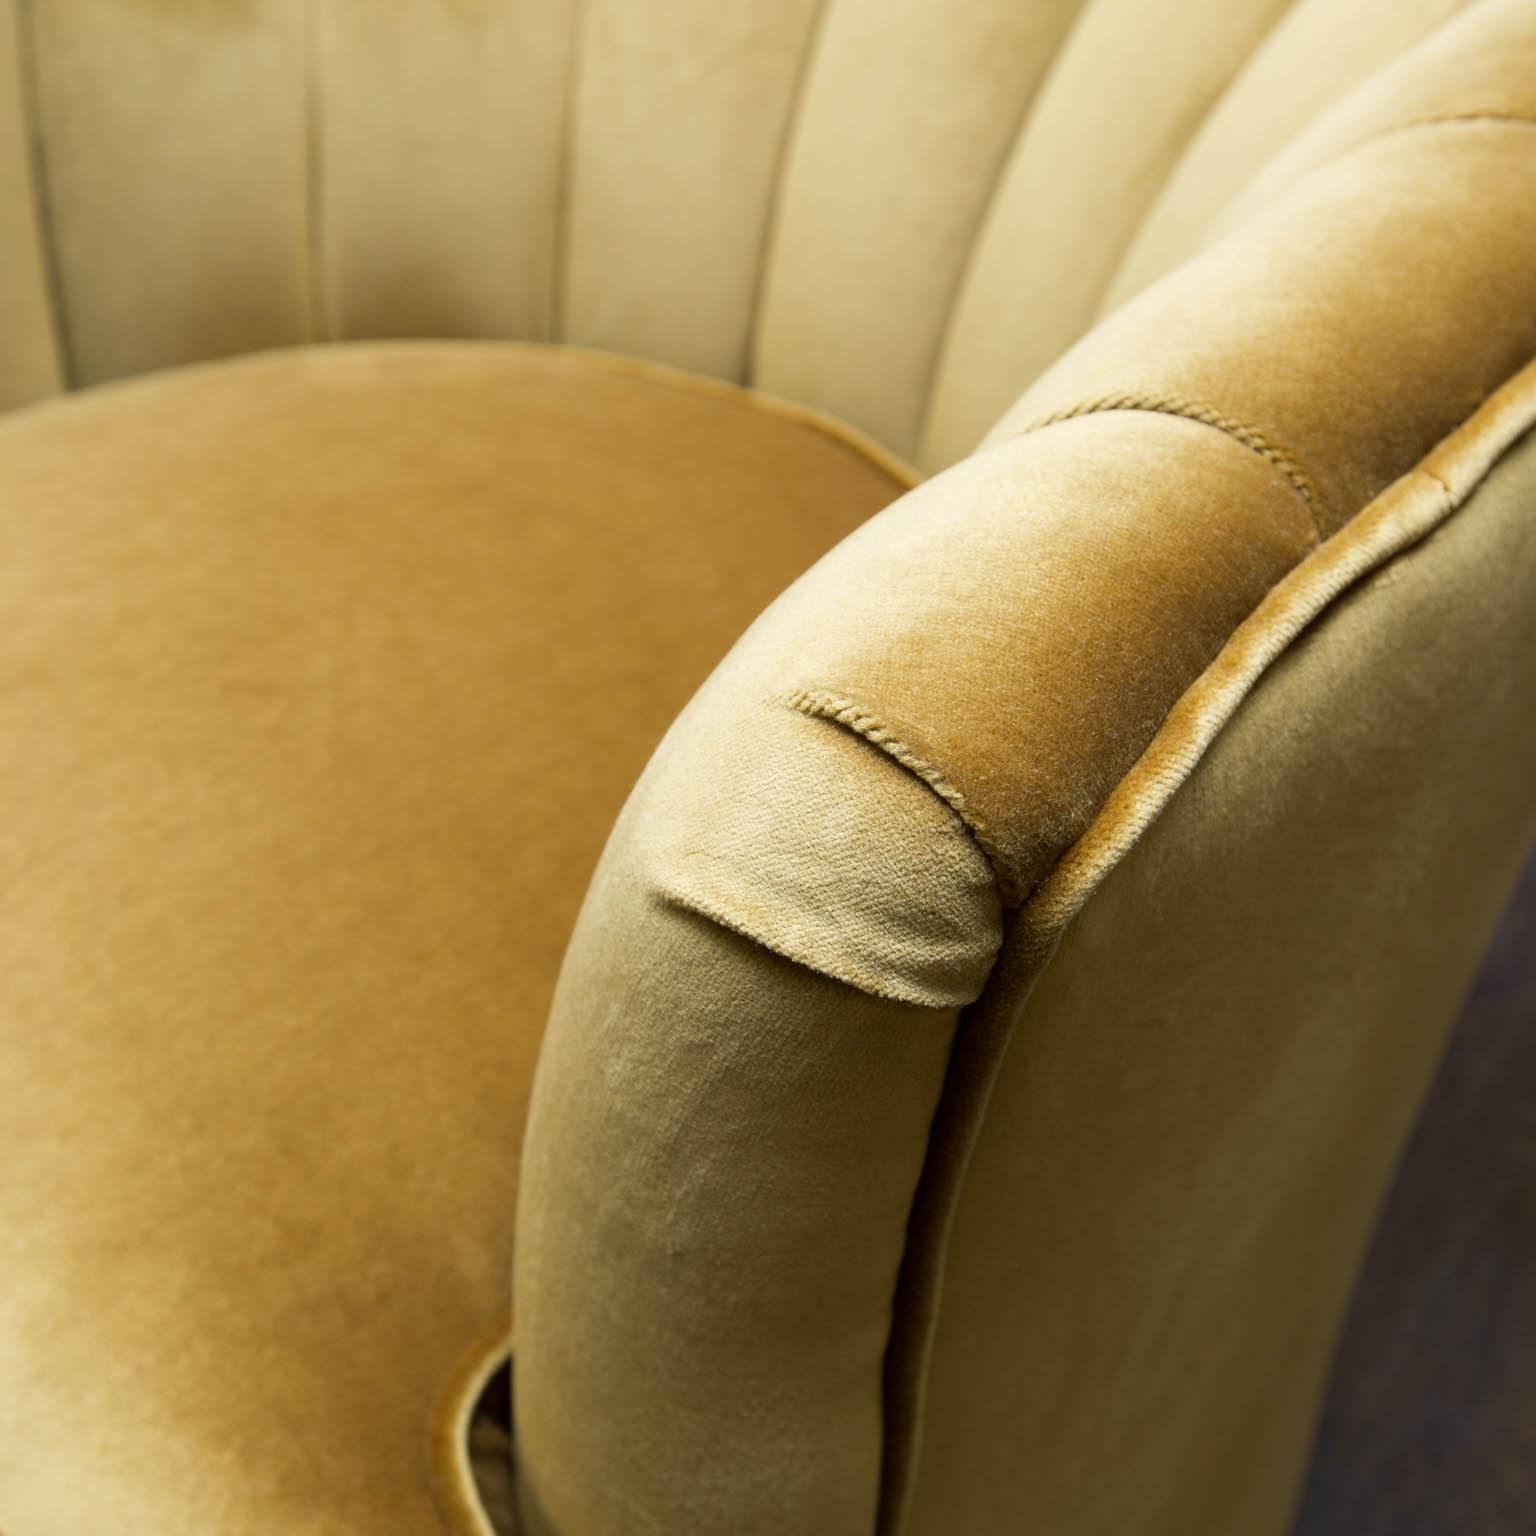 Freshly reupholstered in gold velvet, these fifties-era swivel chairs are ready for another 60 years.